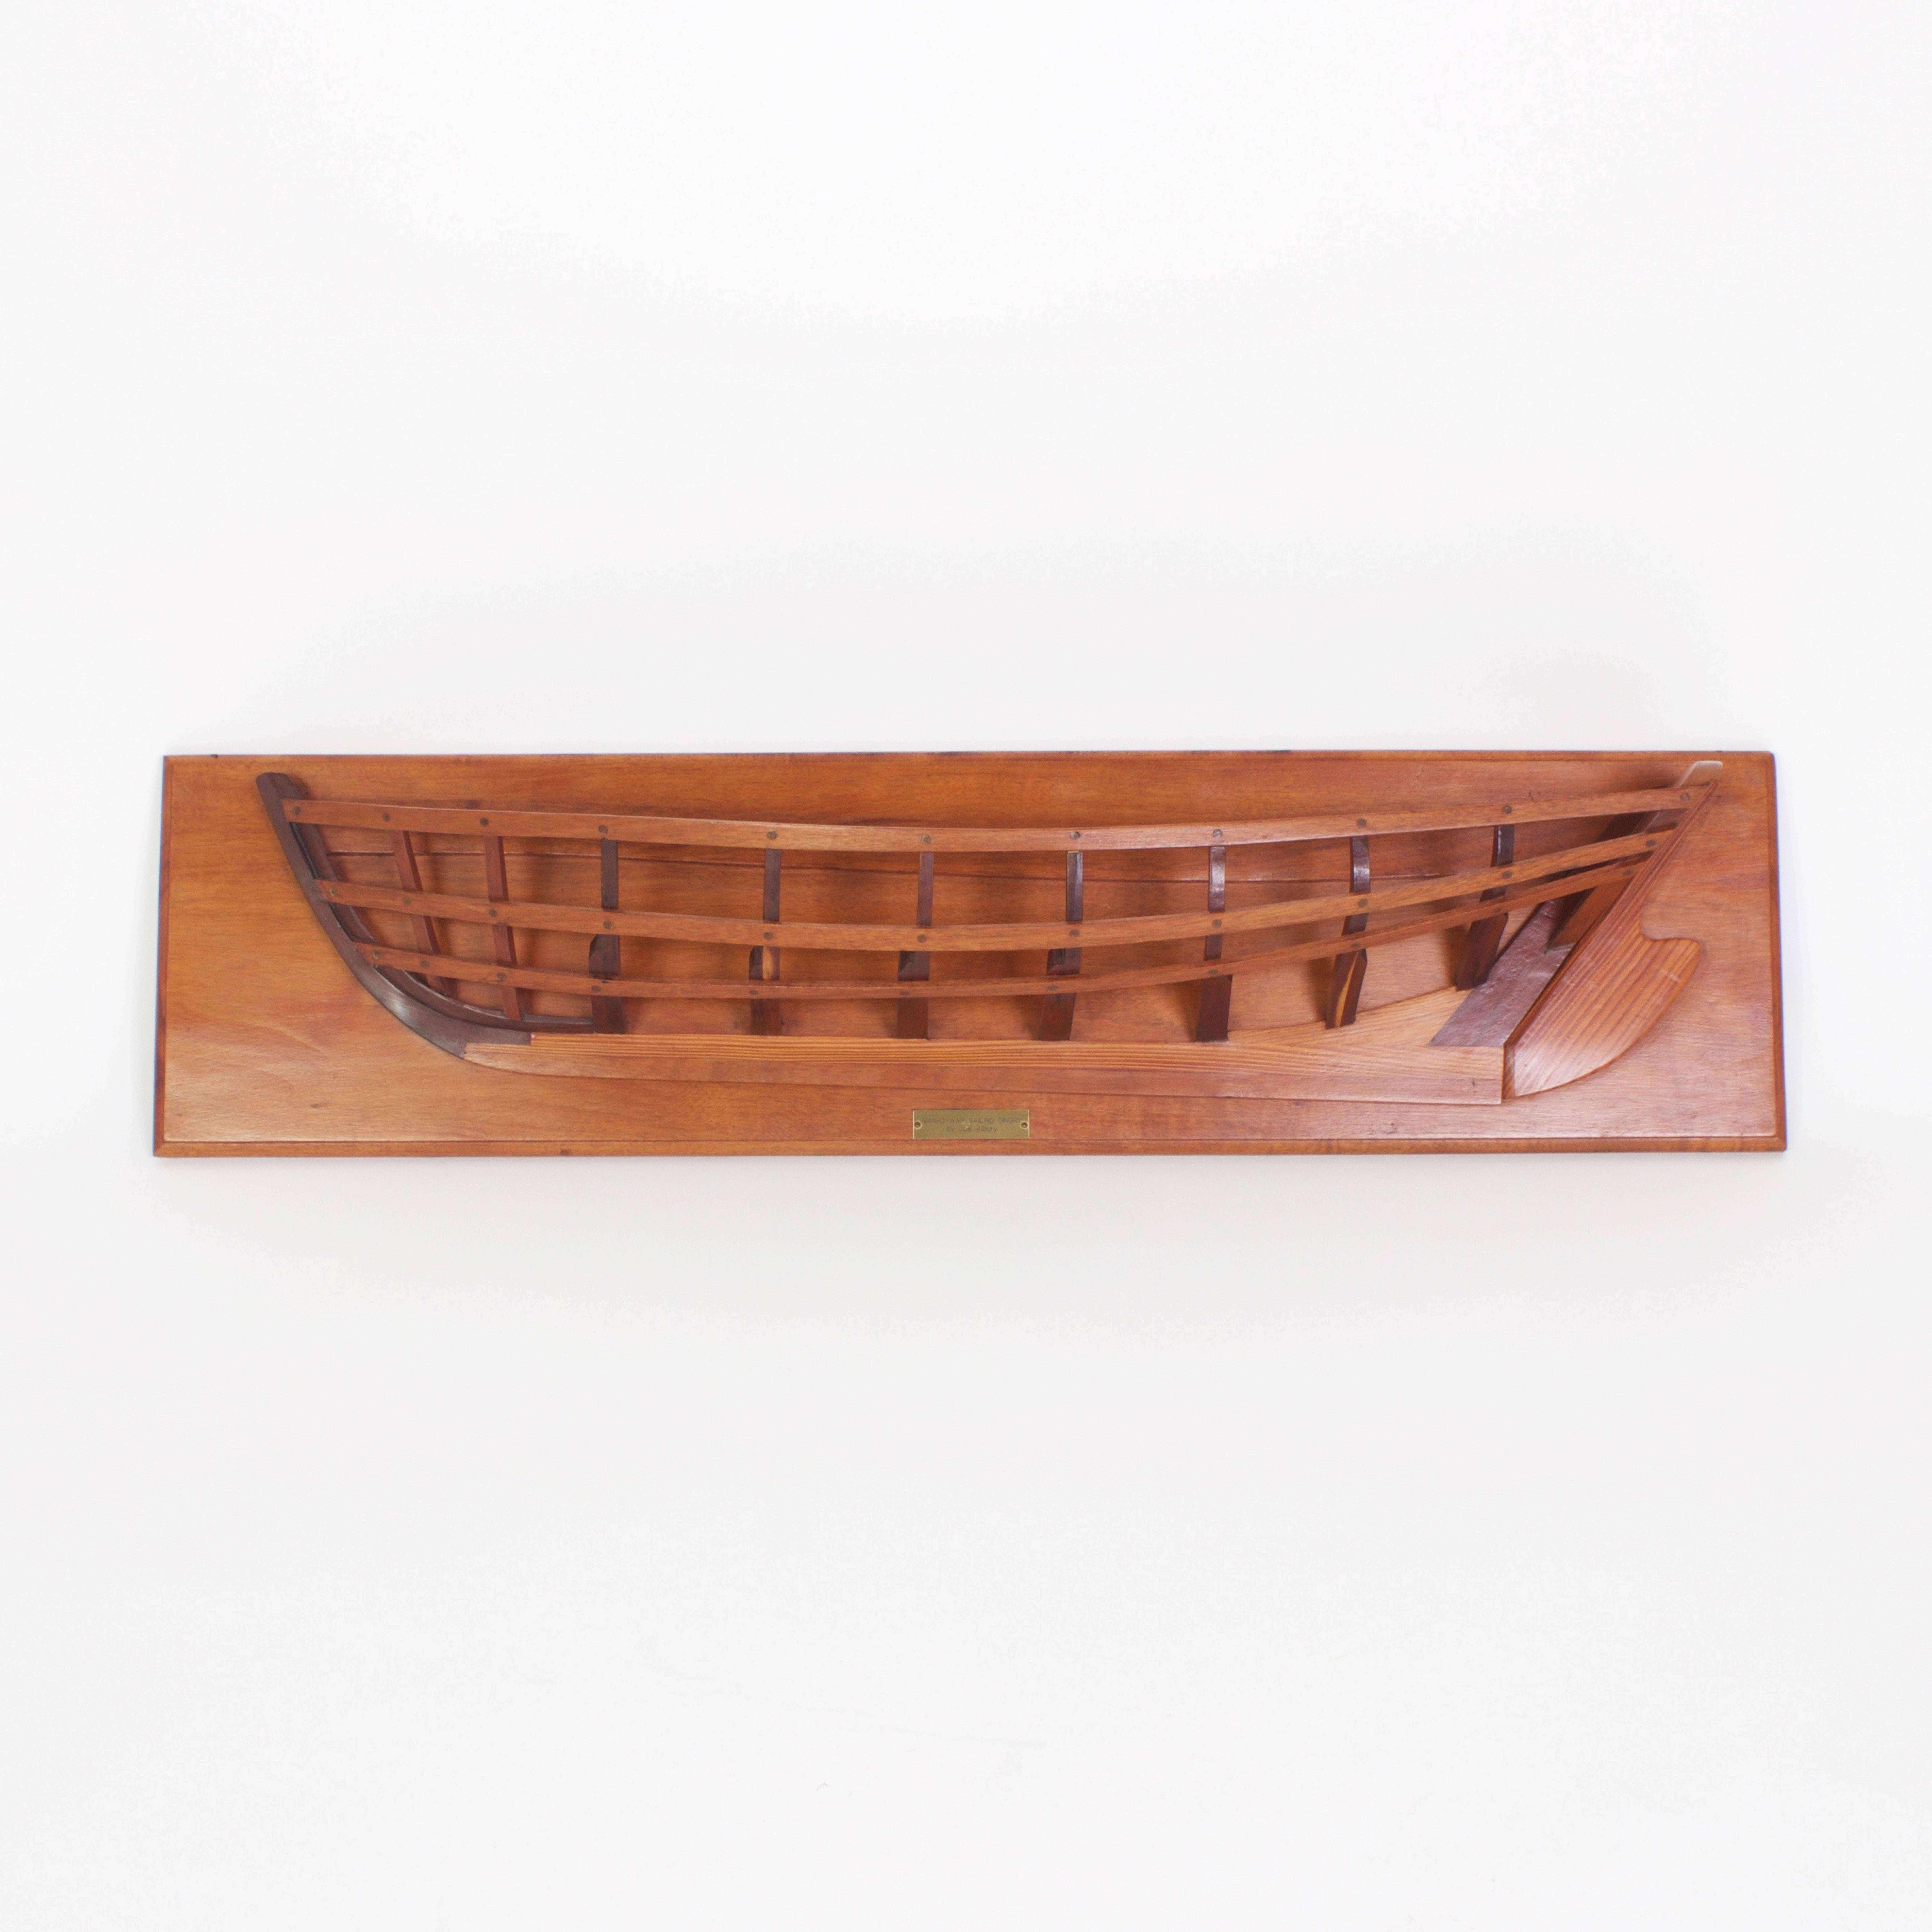 Vintage wall-mounted half hull model made of mahogany, depicting the skeleton of a boat. Handsomely crafted with a pegged construction and signed on a brass plaque 